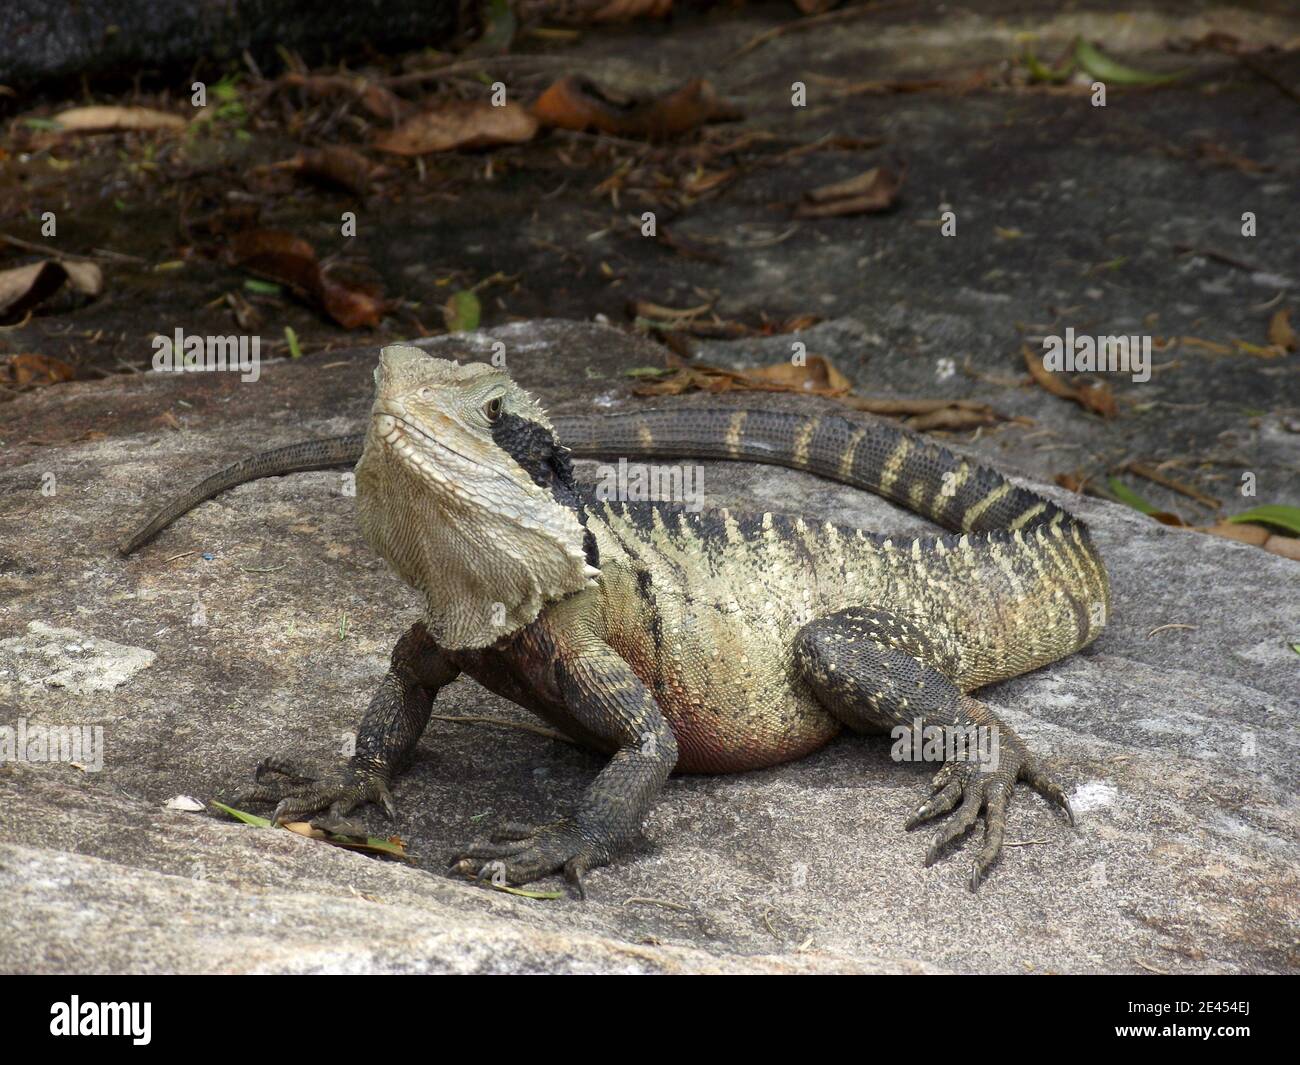 Close up of a Water Dragon on a path near Sydney beach Stock Photo